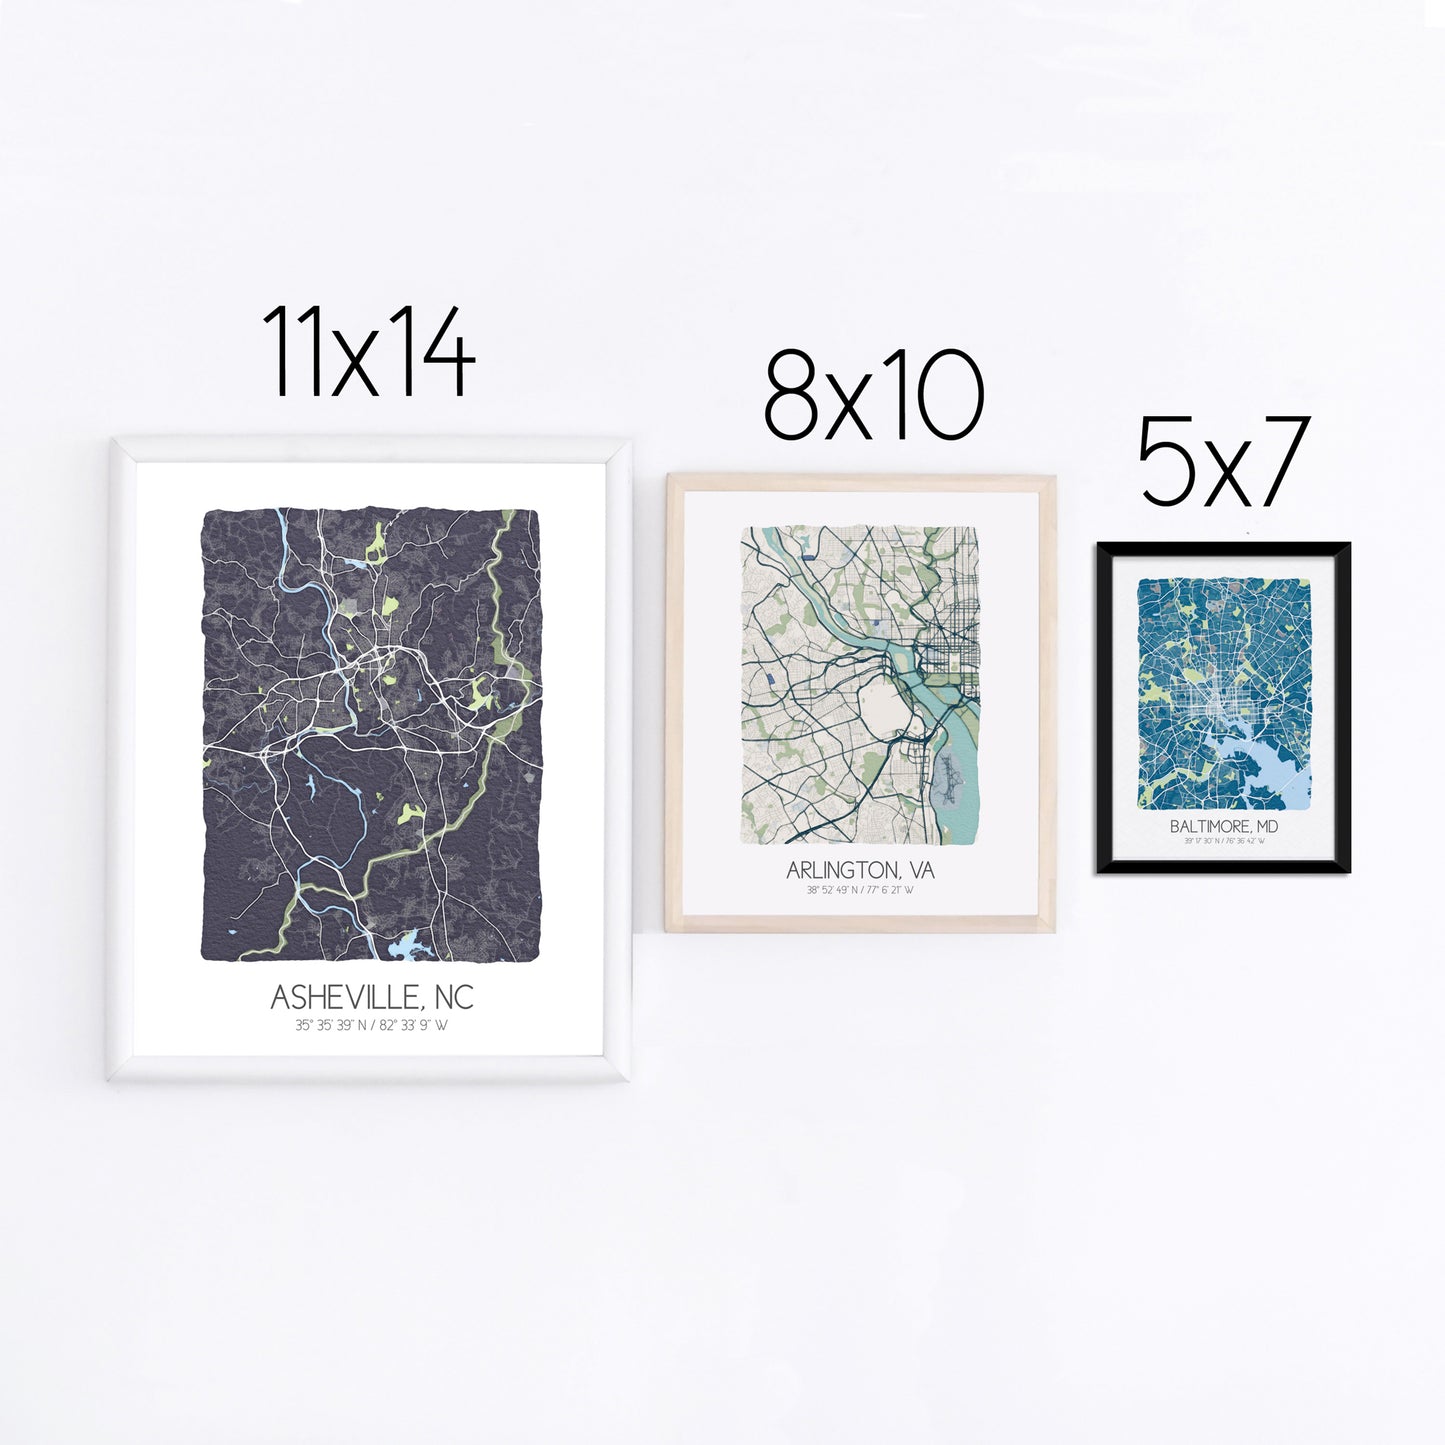 Three city map prints displayed on a wall in three different sizes - 11x14, 8x10, 5x7